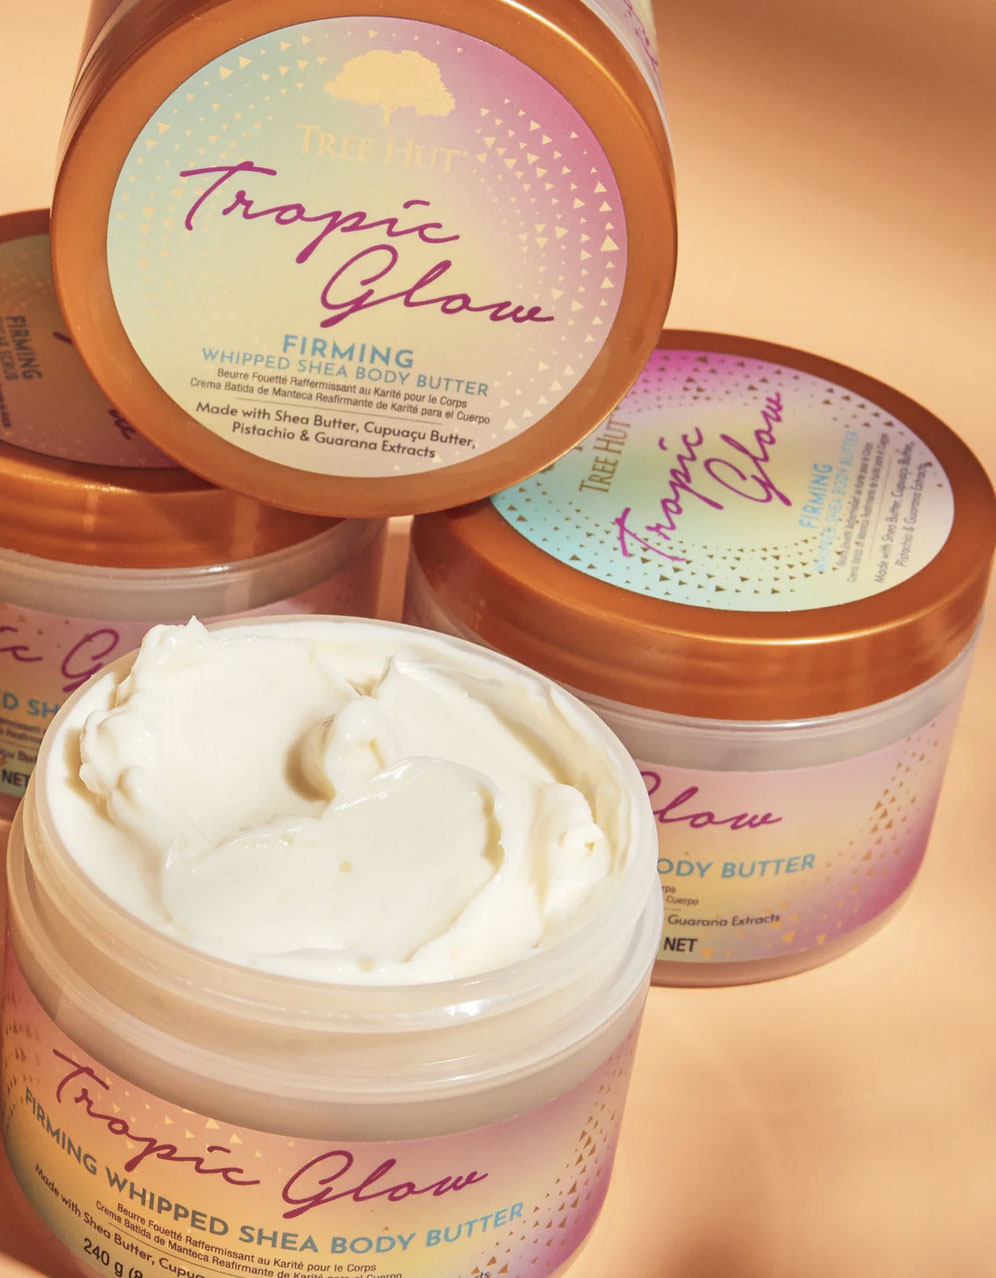 Tree Hut Tropic Glow Whipped Body Butter